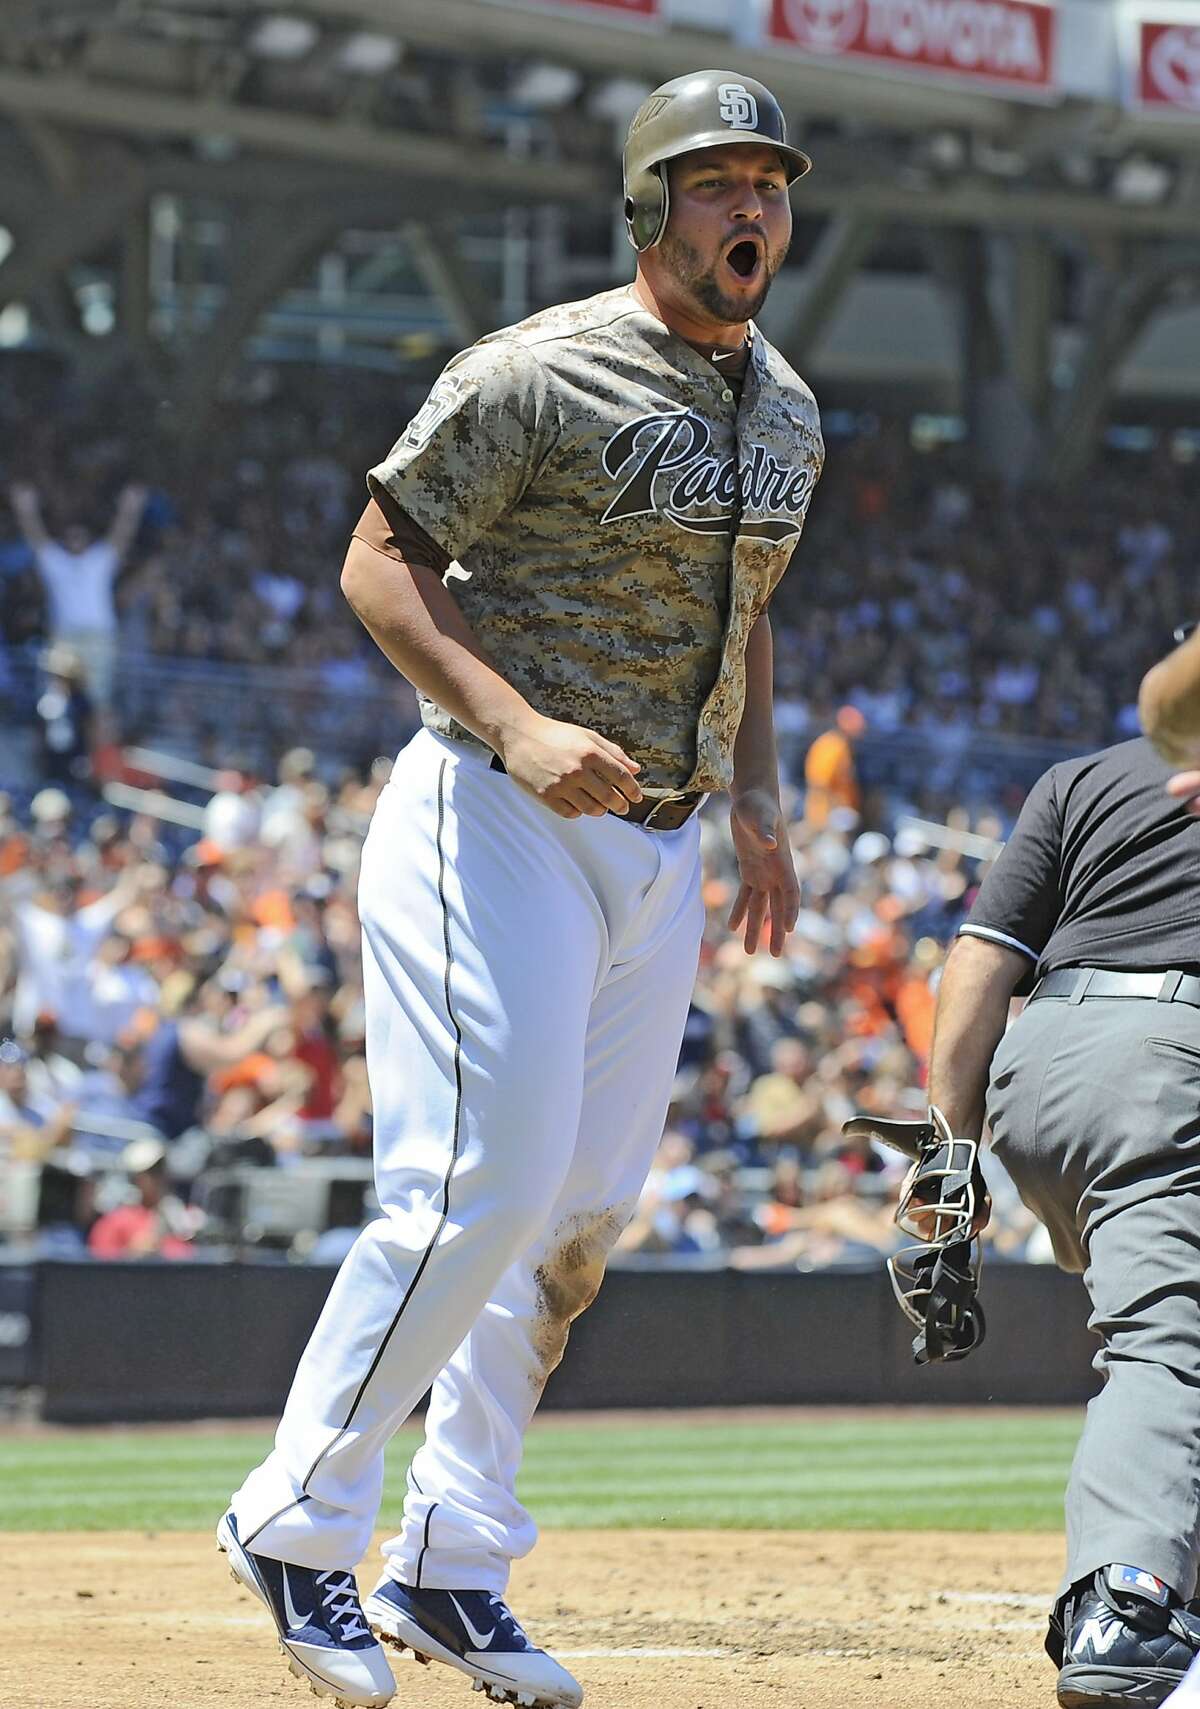 Yonder Alonso #23 of the San Diego Padres celebrates after scoring during the first inning of a baseball game against the San Francisco Giants at Petco Park on August 19, 2012 in San Diego, California. (Photo by Denis Poroy/Getty Images)